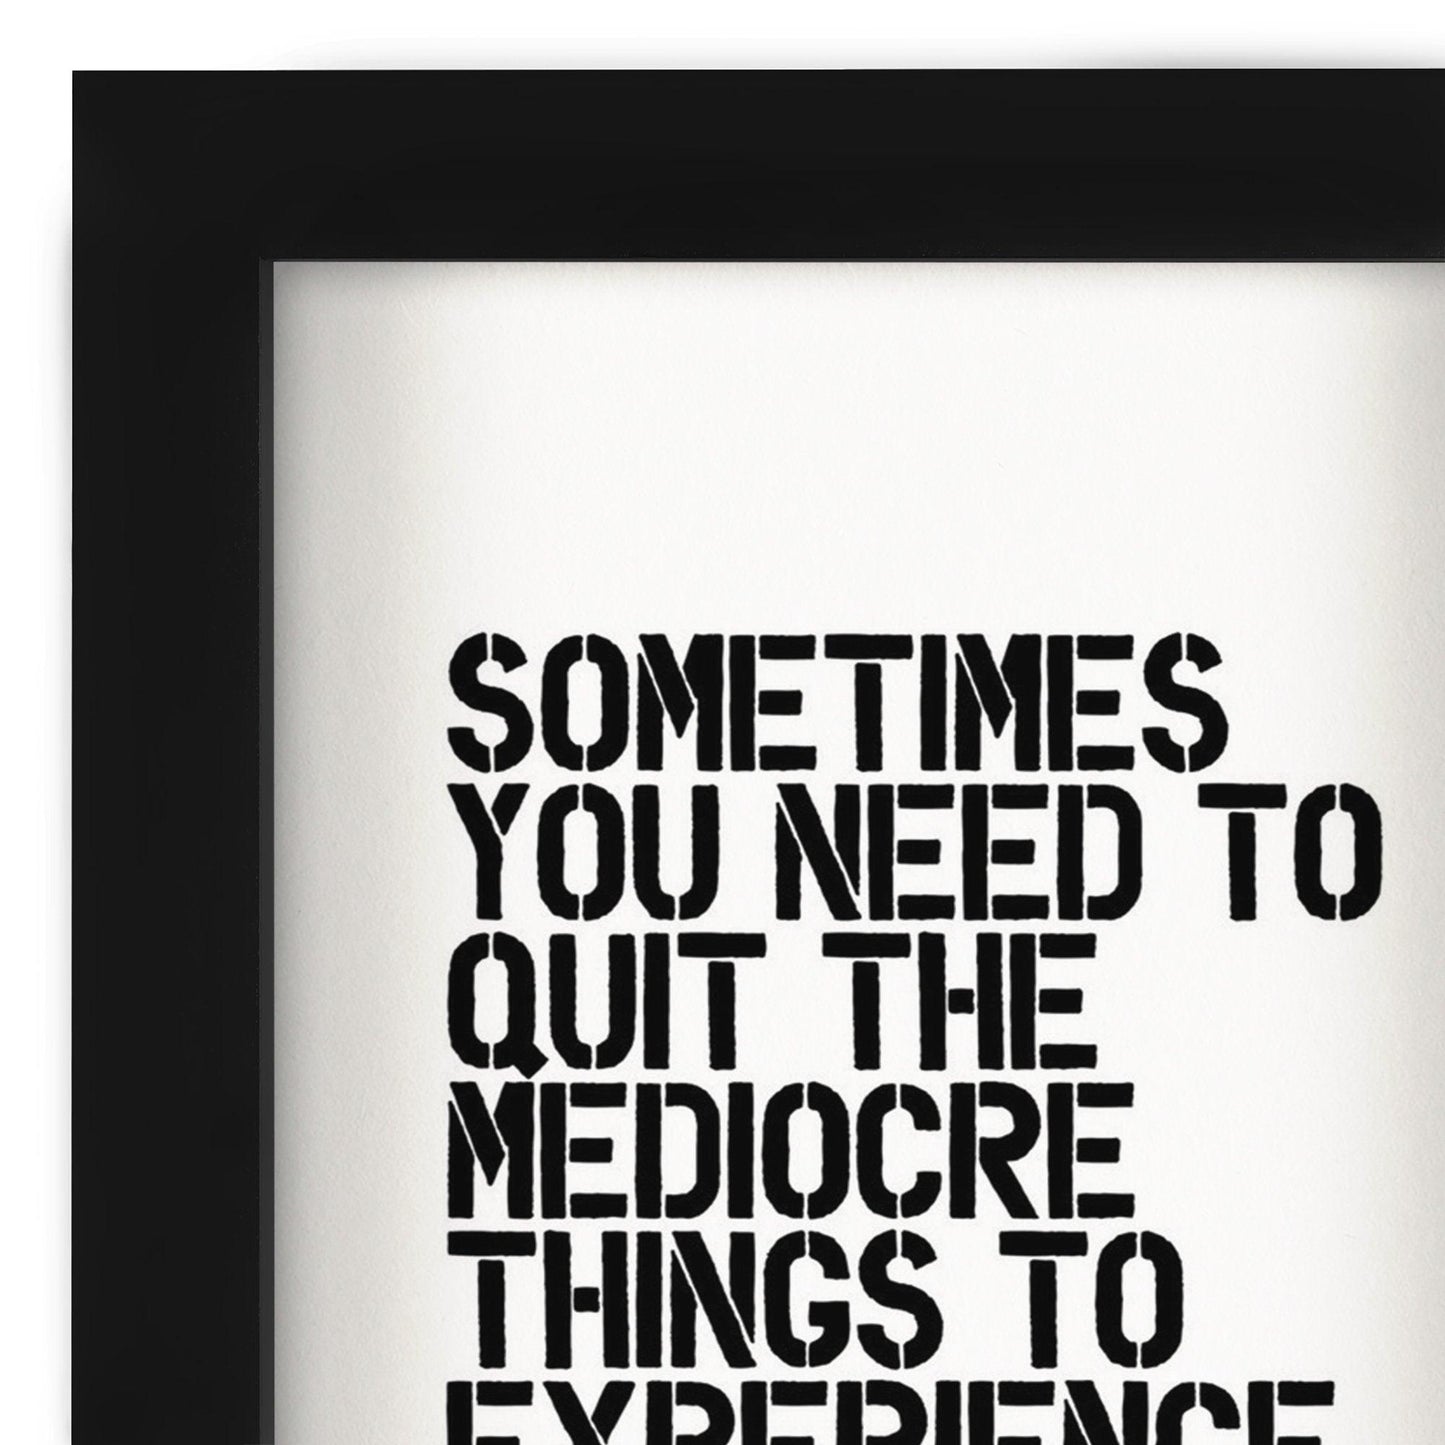 Sometimes You Need To Quit The Mediocre By Motivated Type - Shadow Box Framed Art - Americanflat